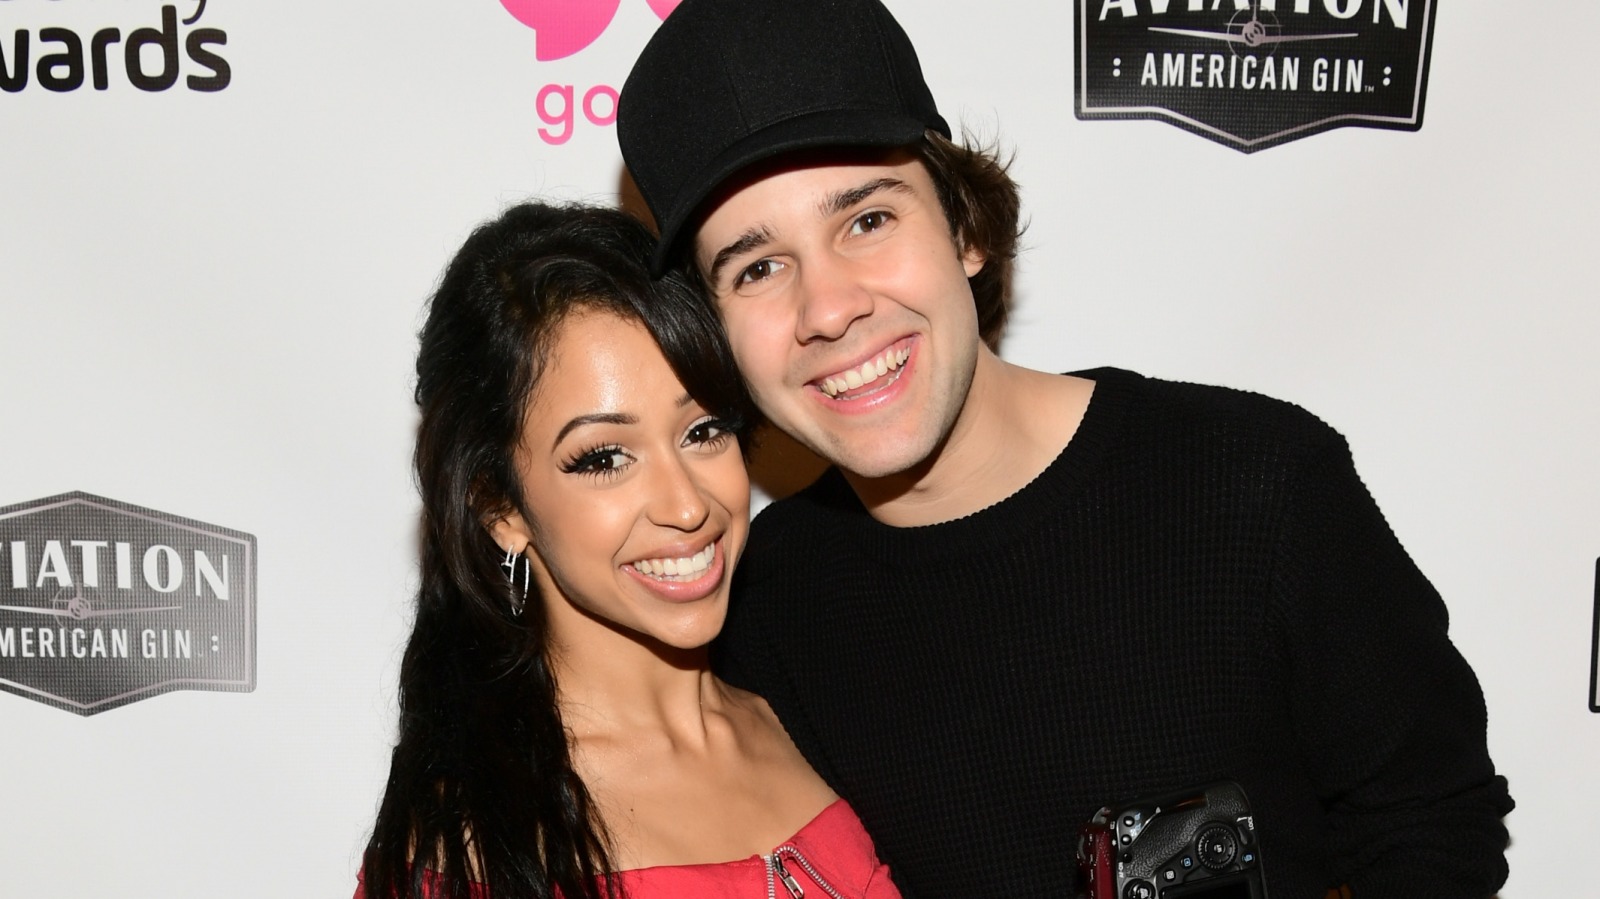 Details You Didn't Know About Liza Koshy And David Dobrik's Relationship